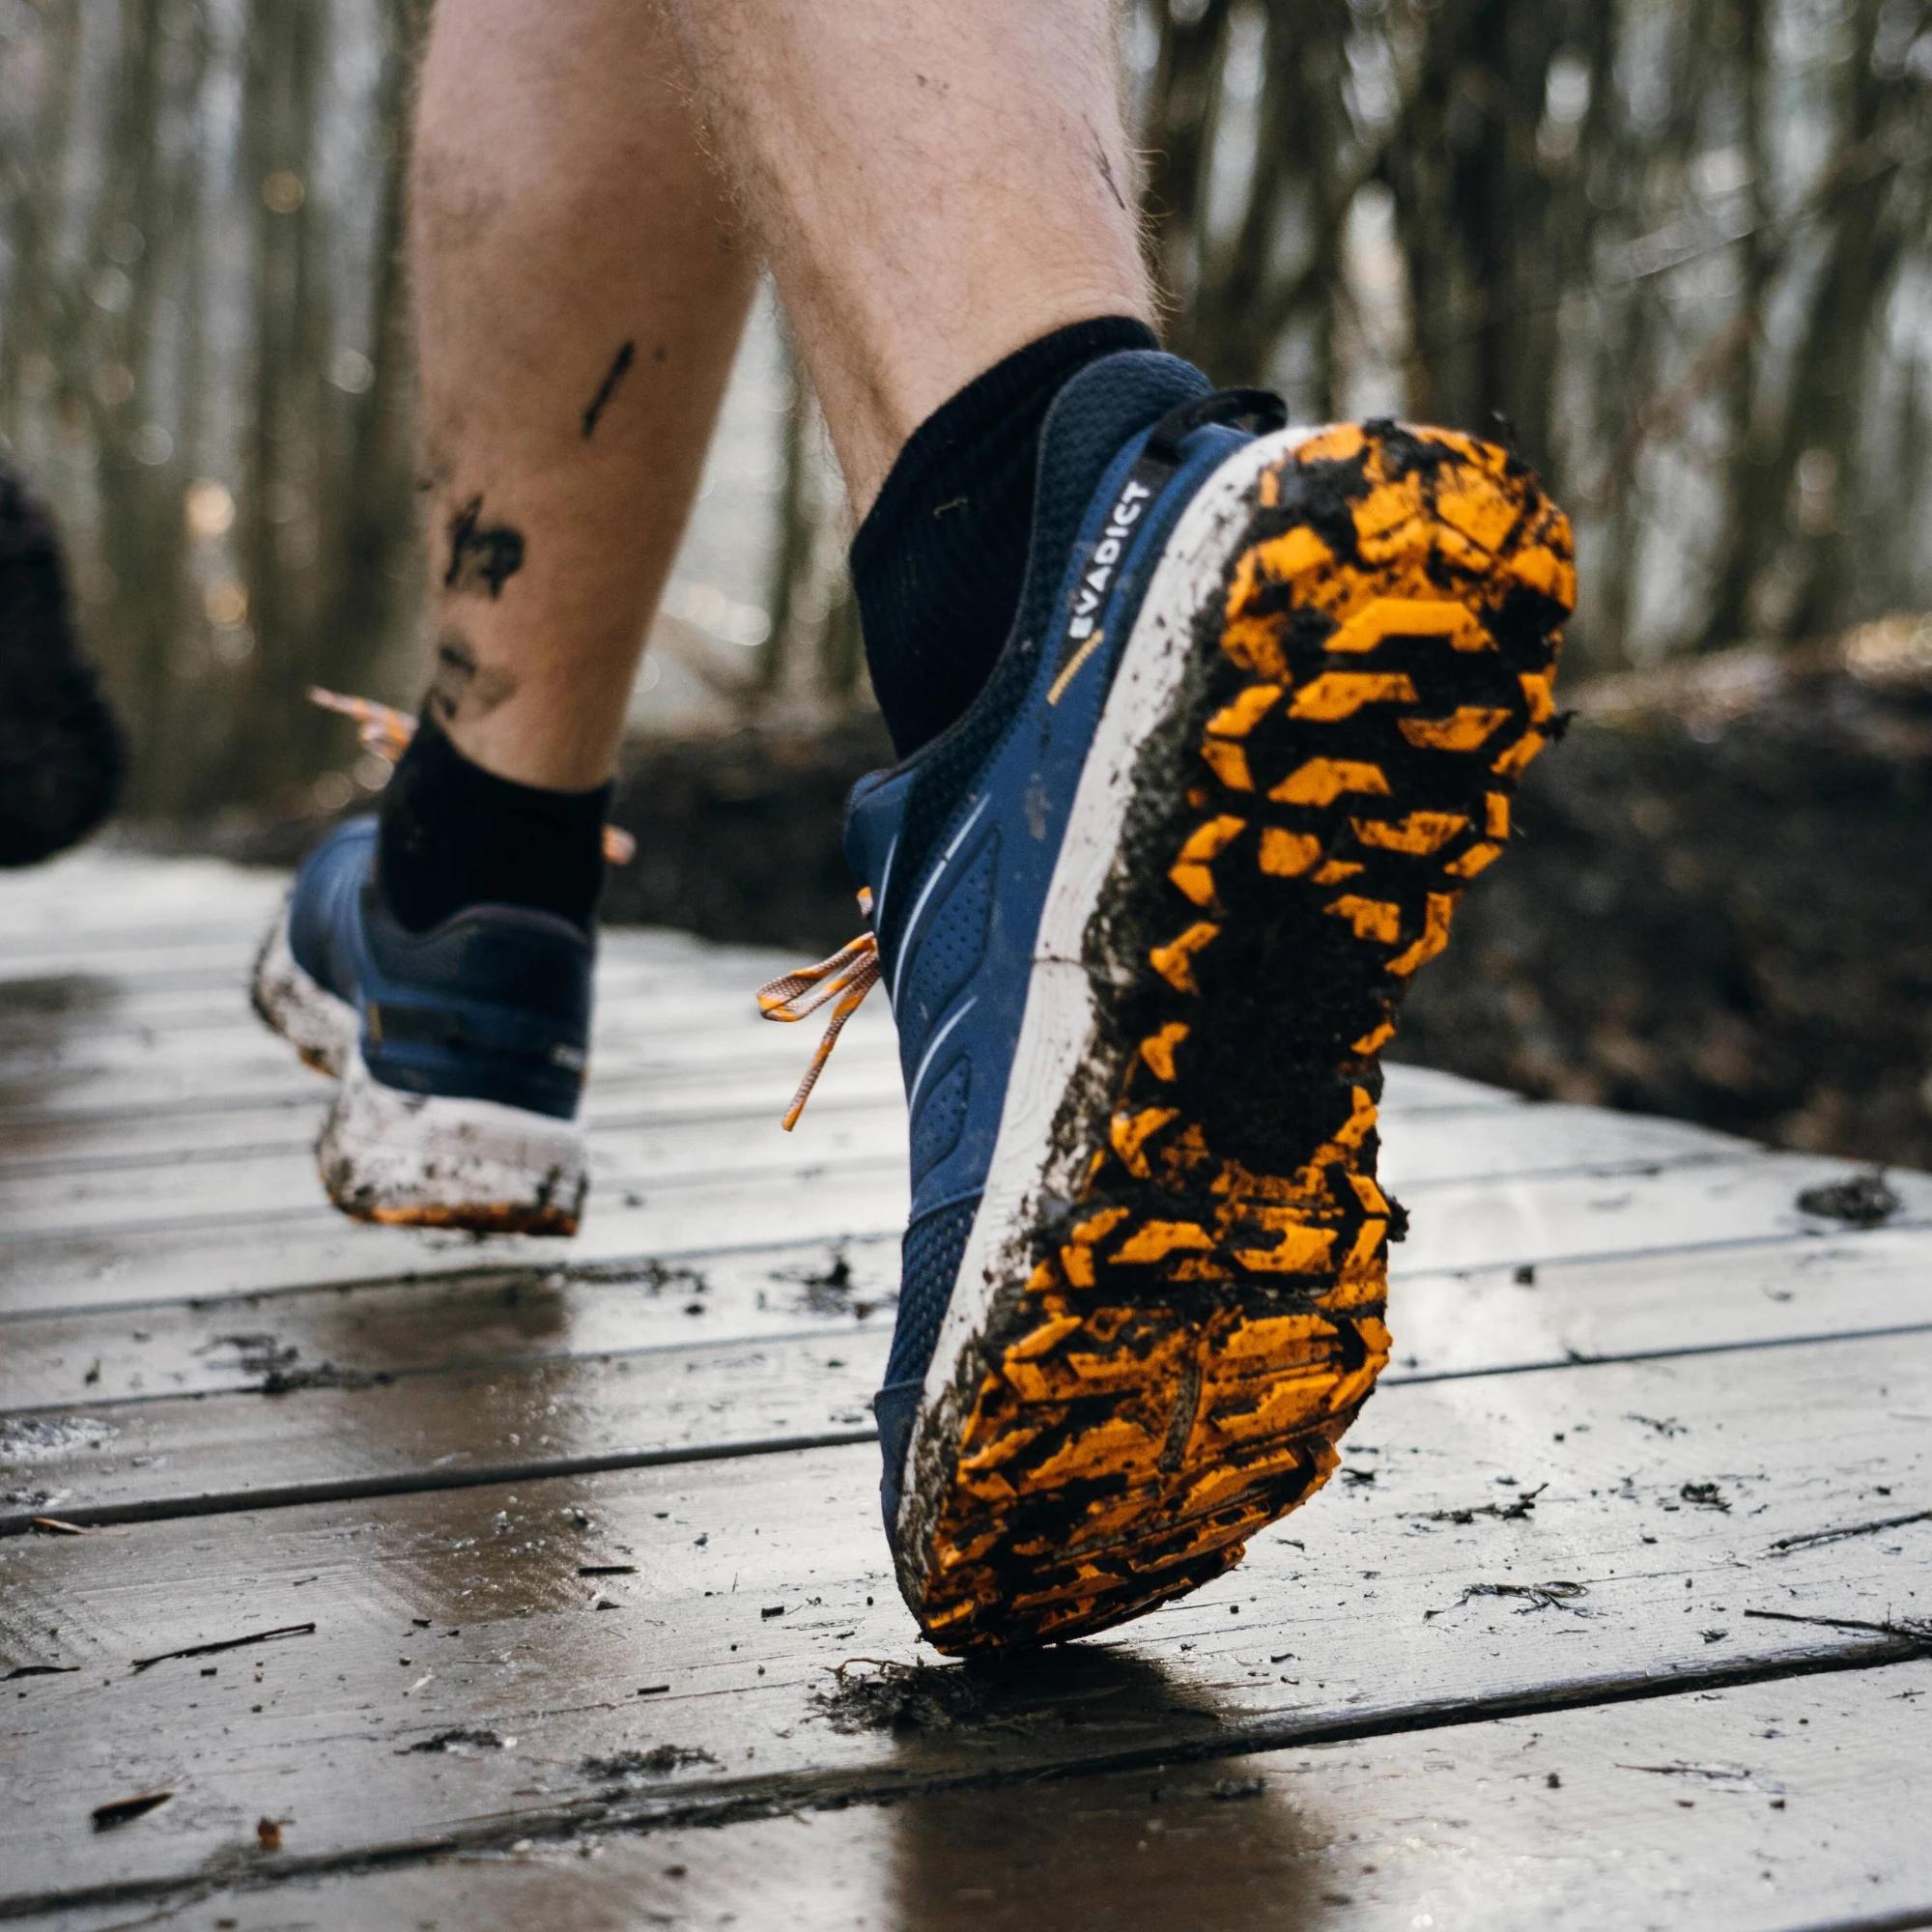 TRAIL RUNNING SHOES FOR TRAILBLAZING ADVENTURES